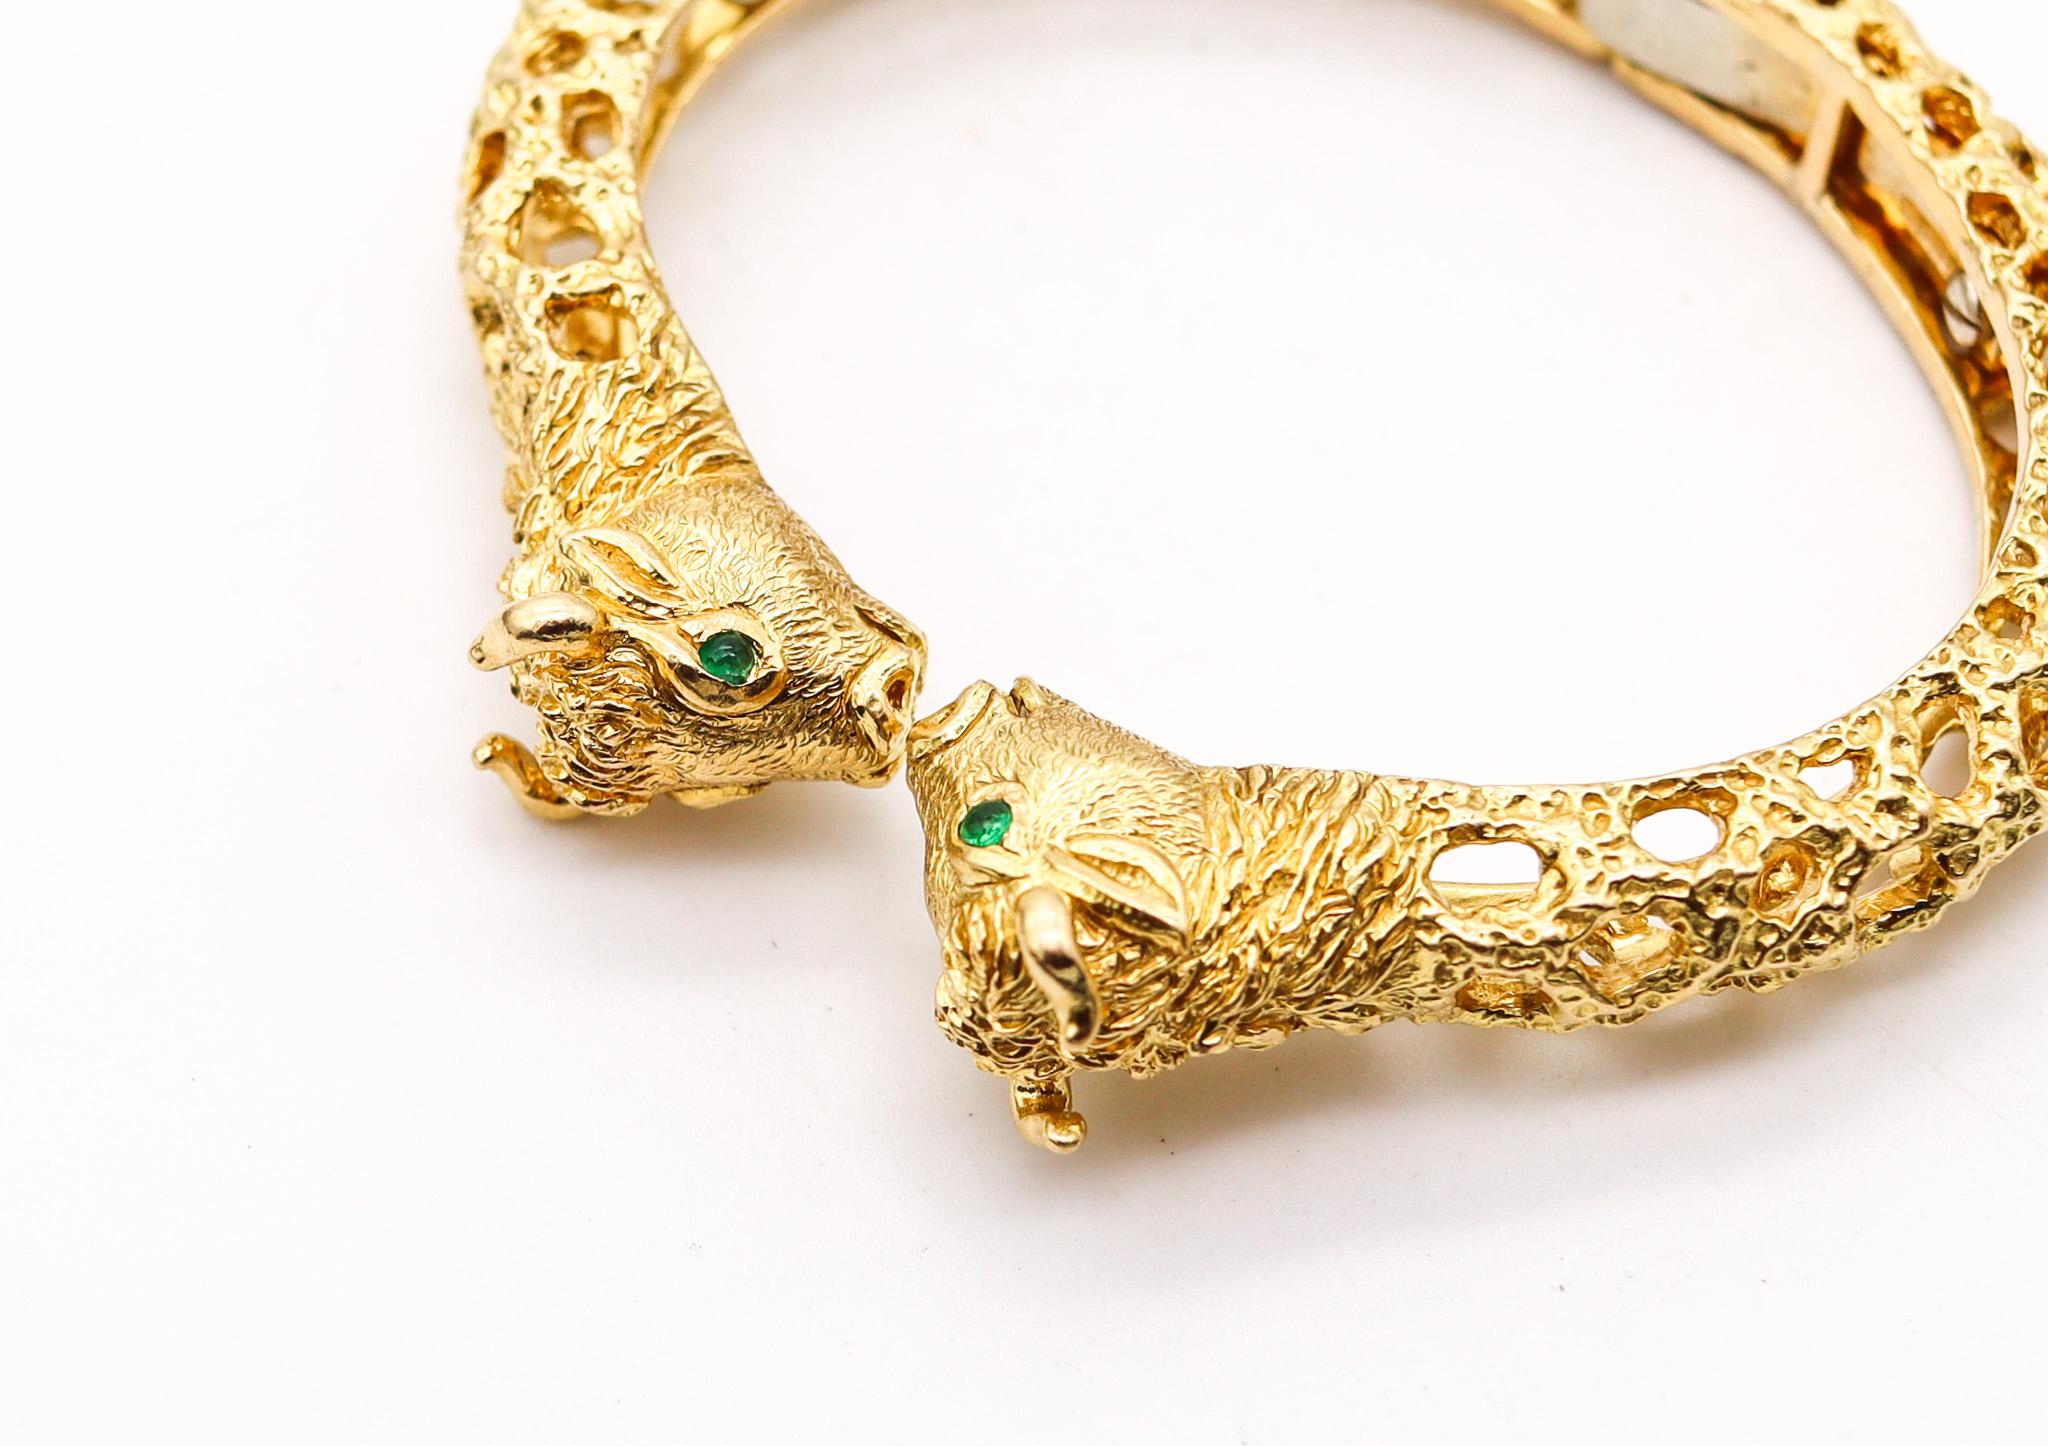 Bangle bracelet designed by David Webb.

Beautiful Taurus zodiacal bangle bracelet, created in New York City at the jewelry atelier of David Webb back in the 1960. This bracelet has been crafted with the heads of two bulls in solid yellow gold of 18